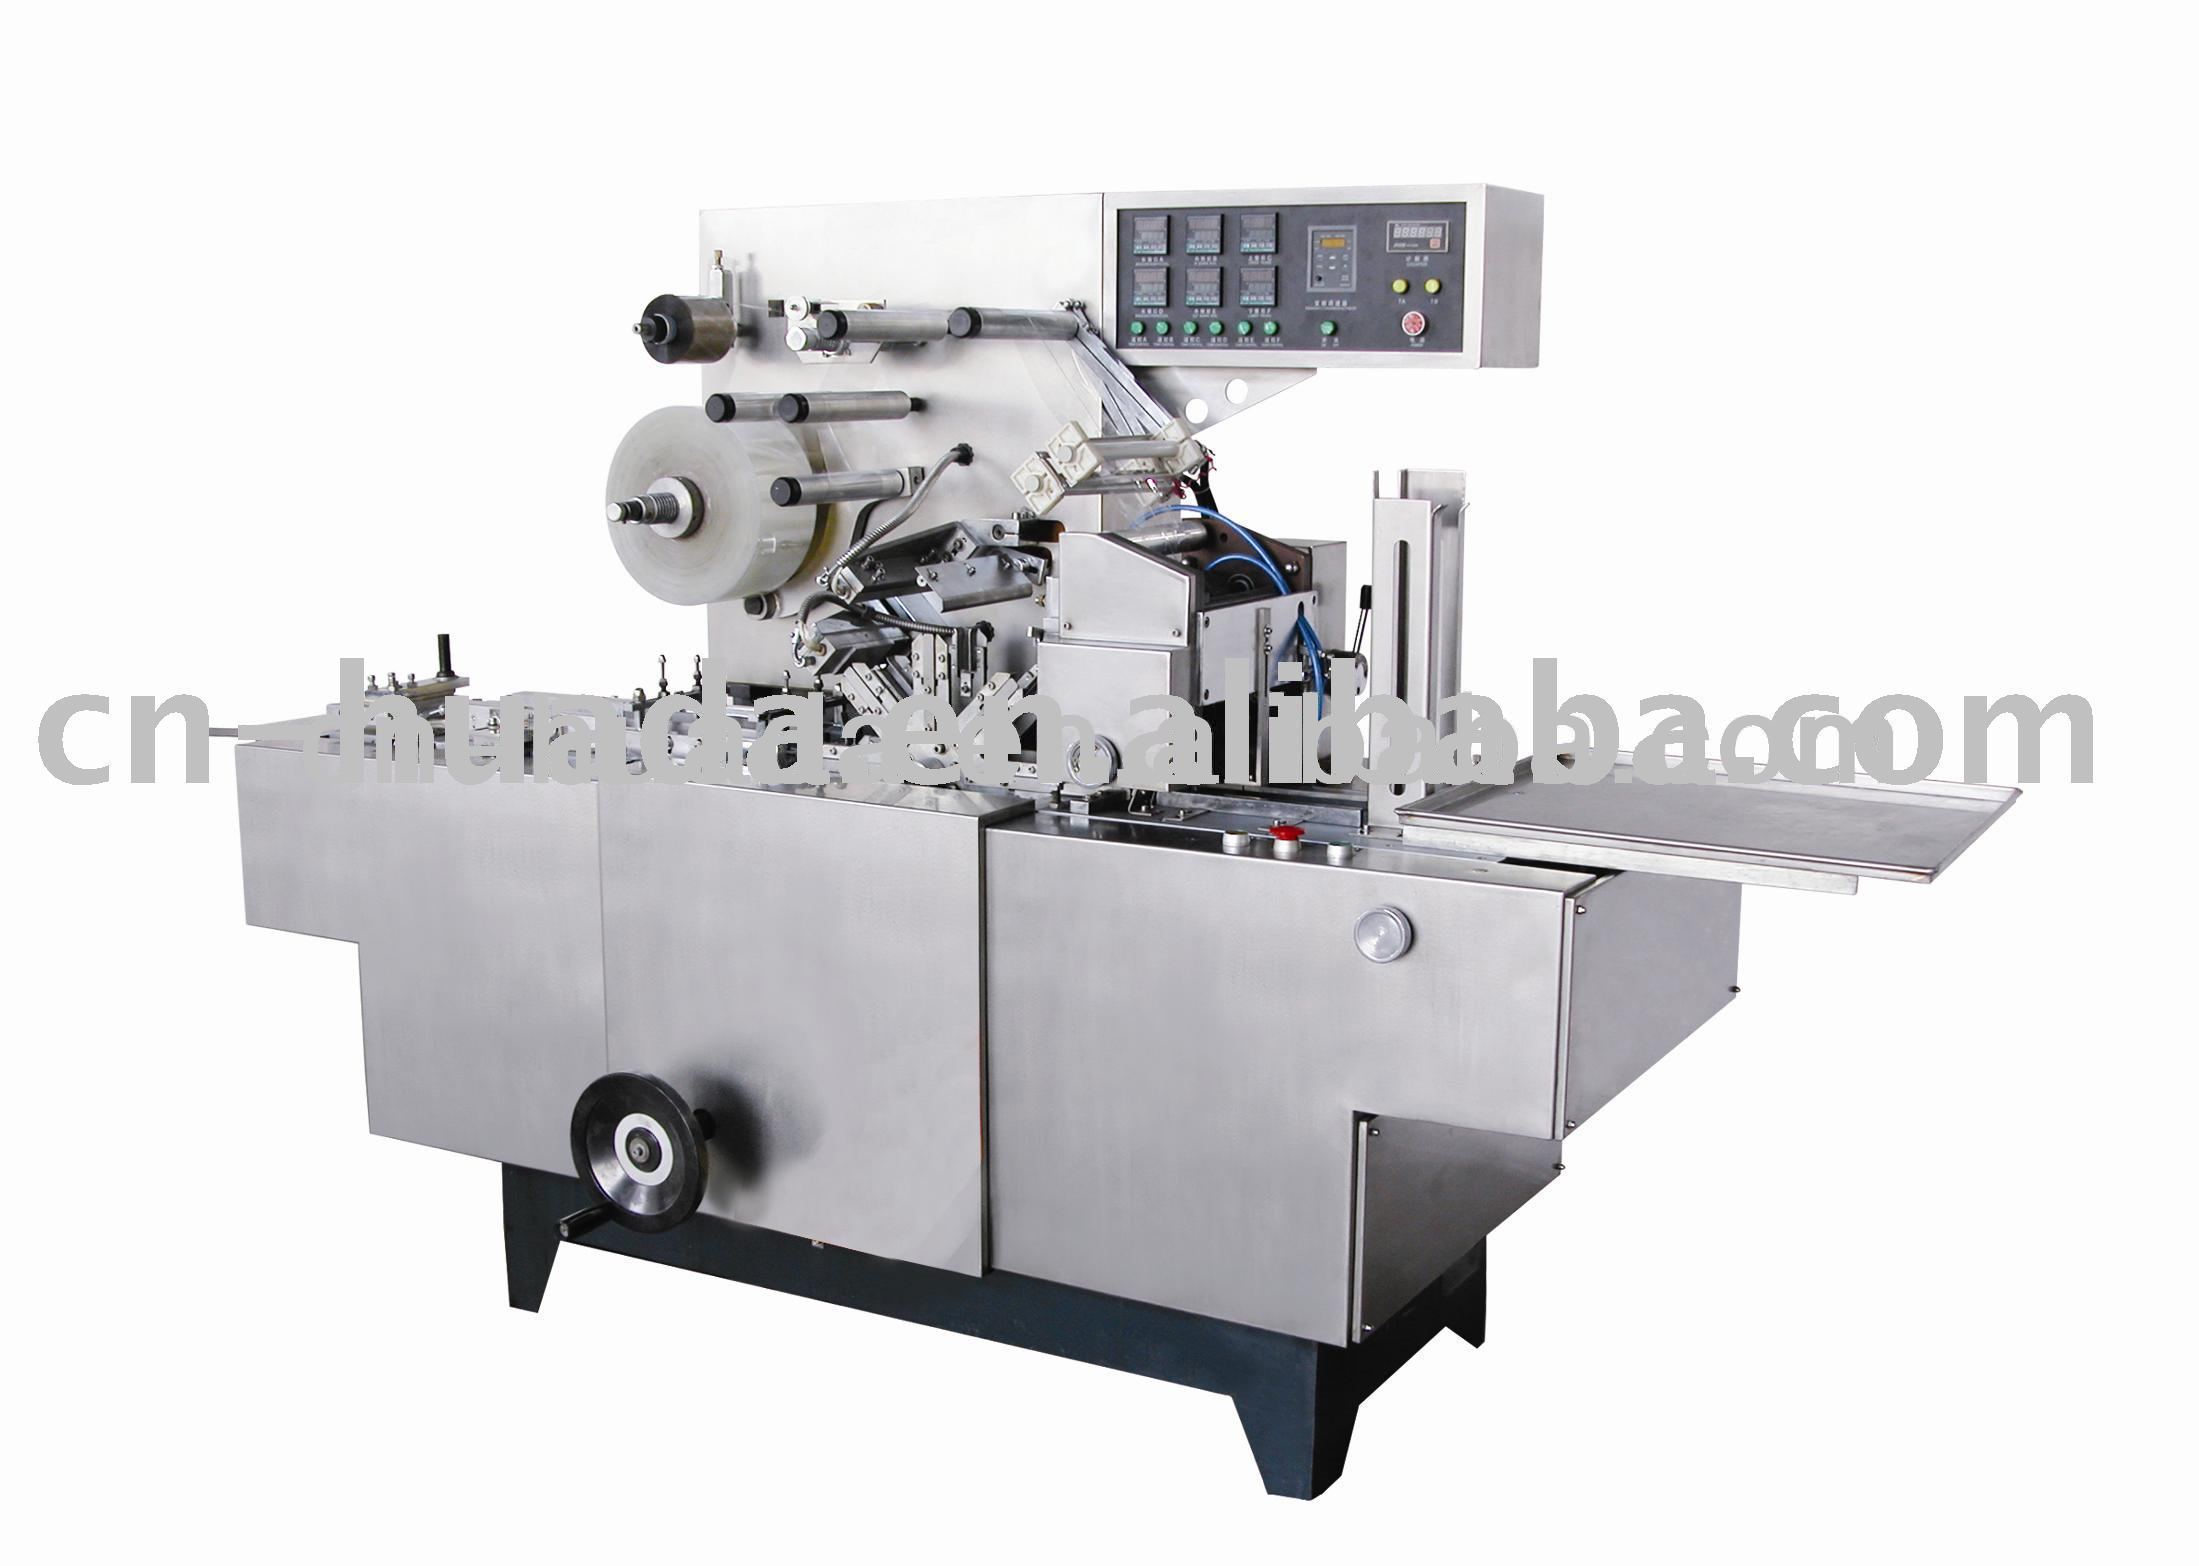 BT-2000A Cellophane Overwrapping Machine